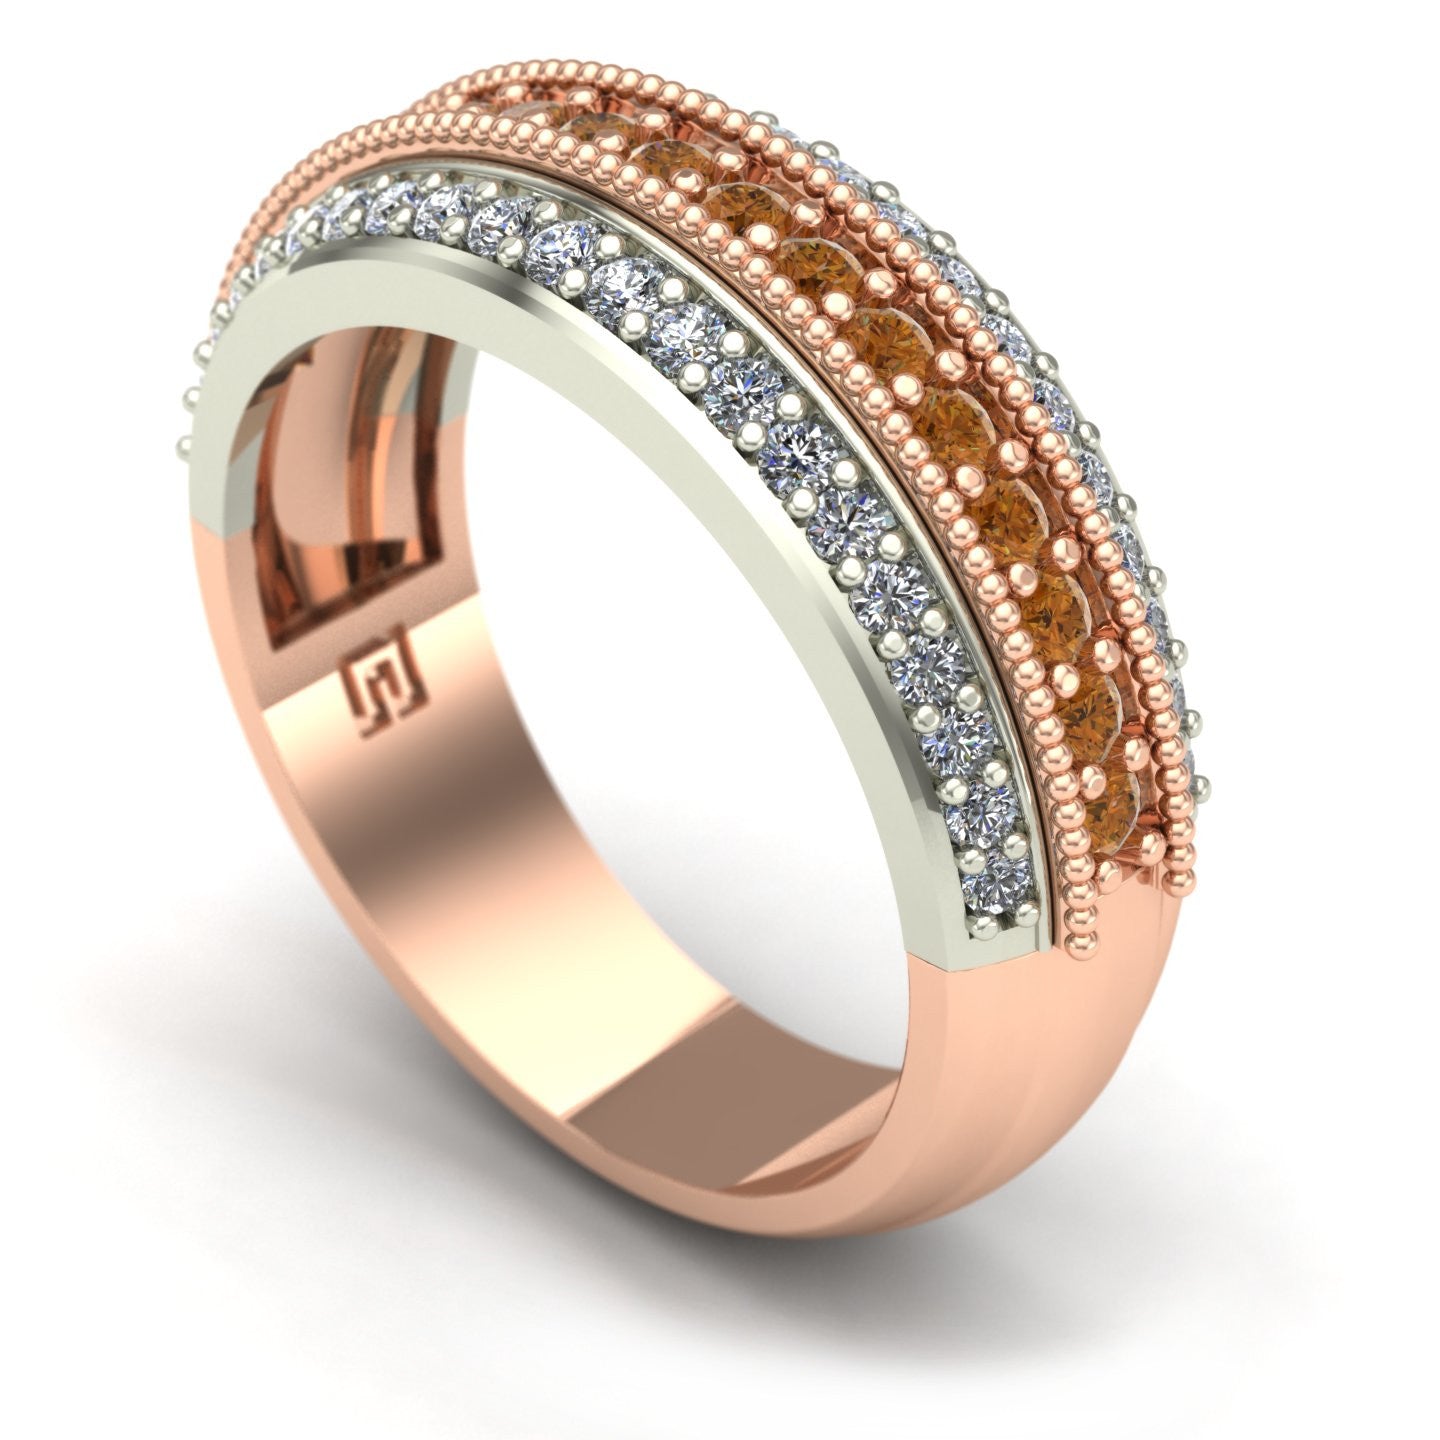 Cognac and white diamond band in 14k rose and white gold - Charles Babb Designs